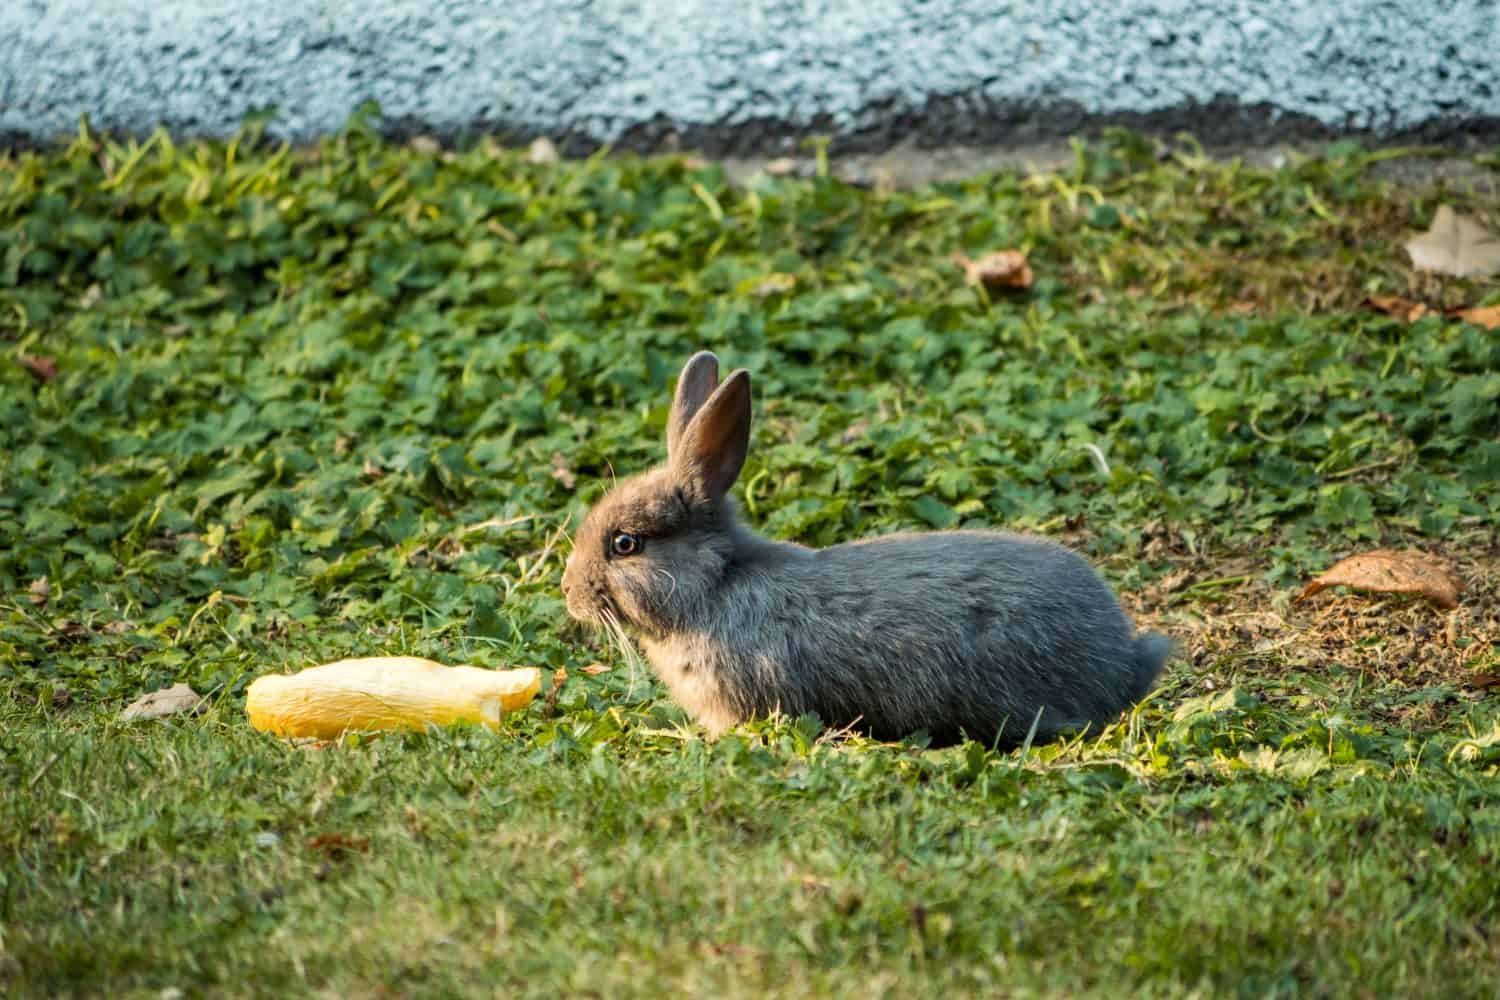 tiny bunny eating a slice of zucchini on the grass under the setting sun light